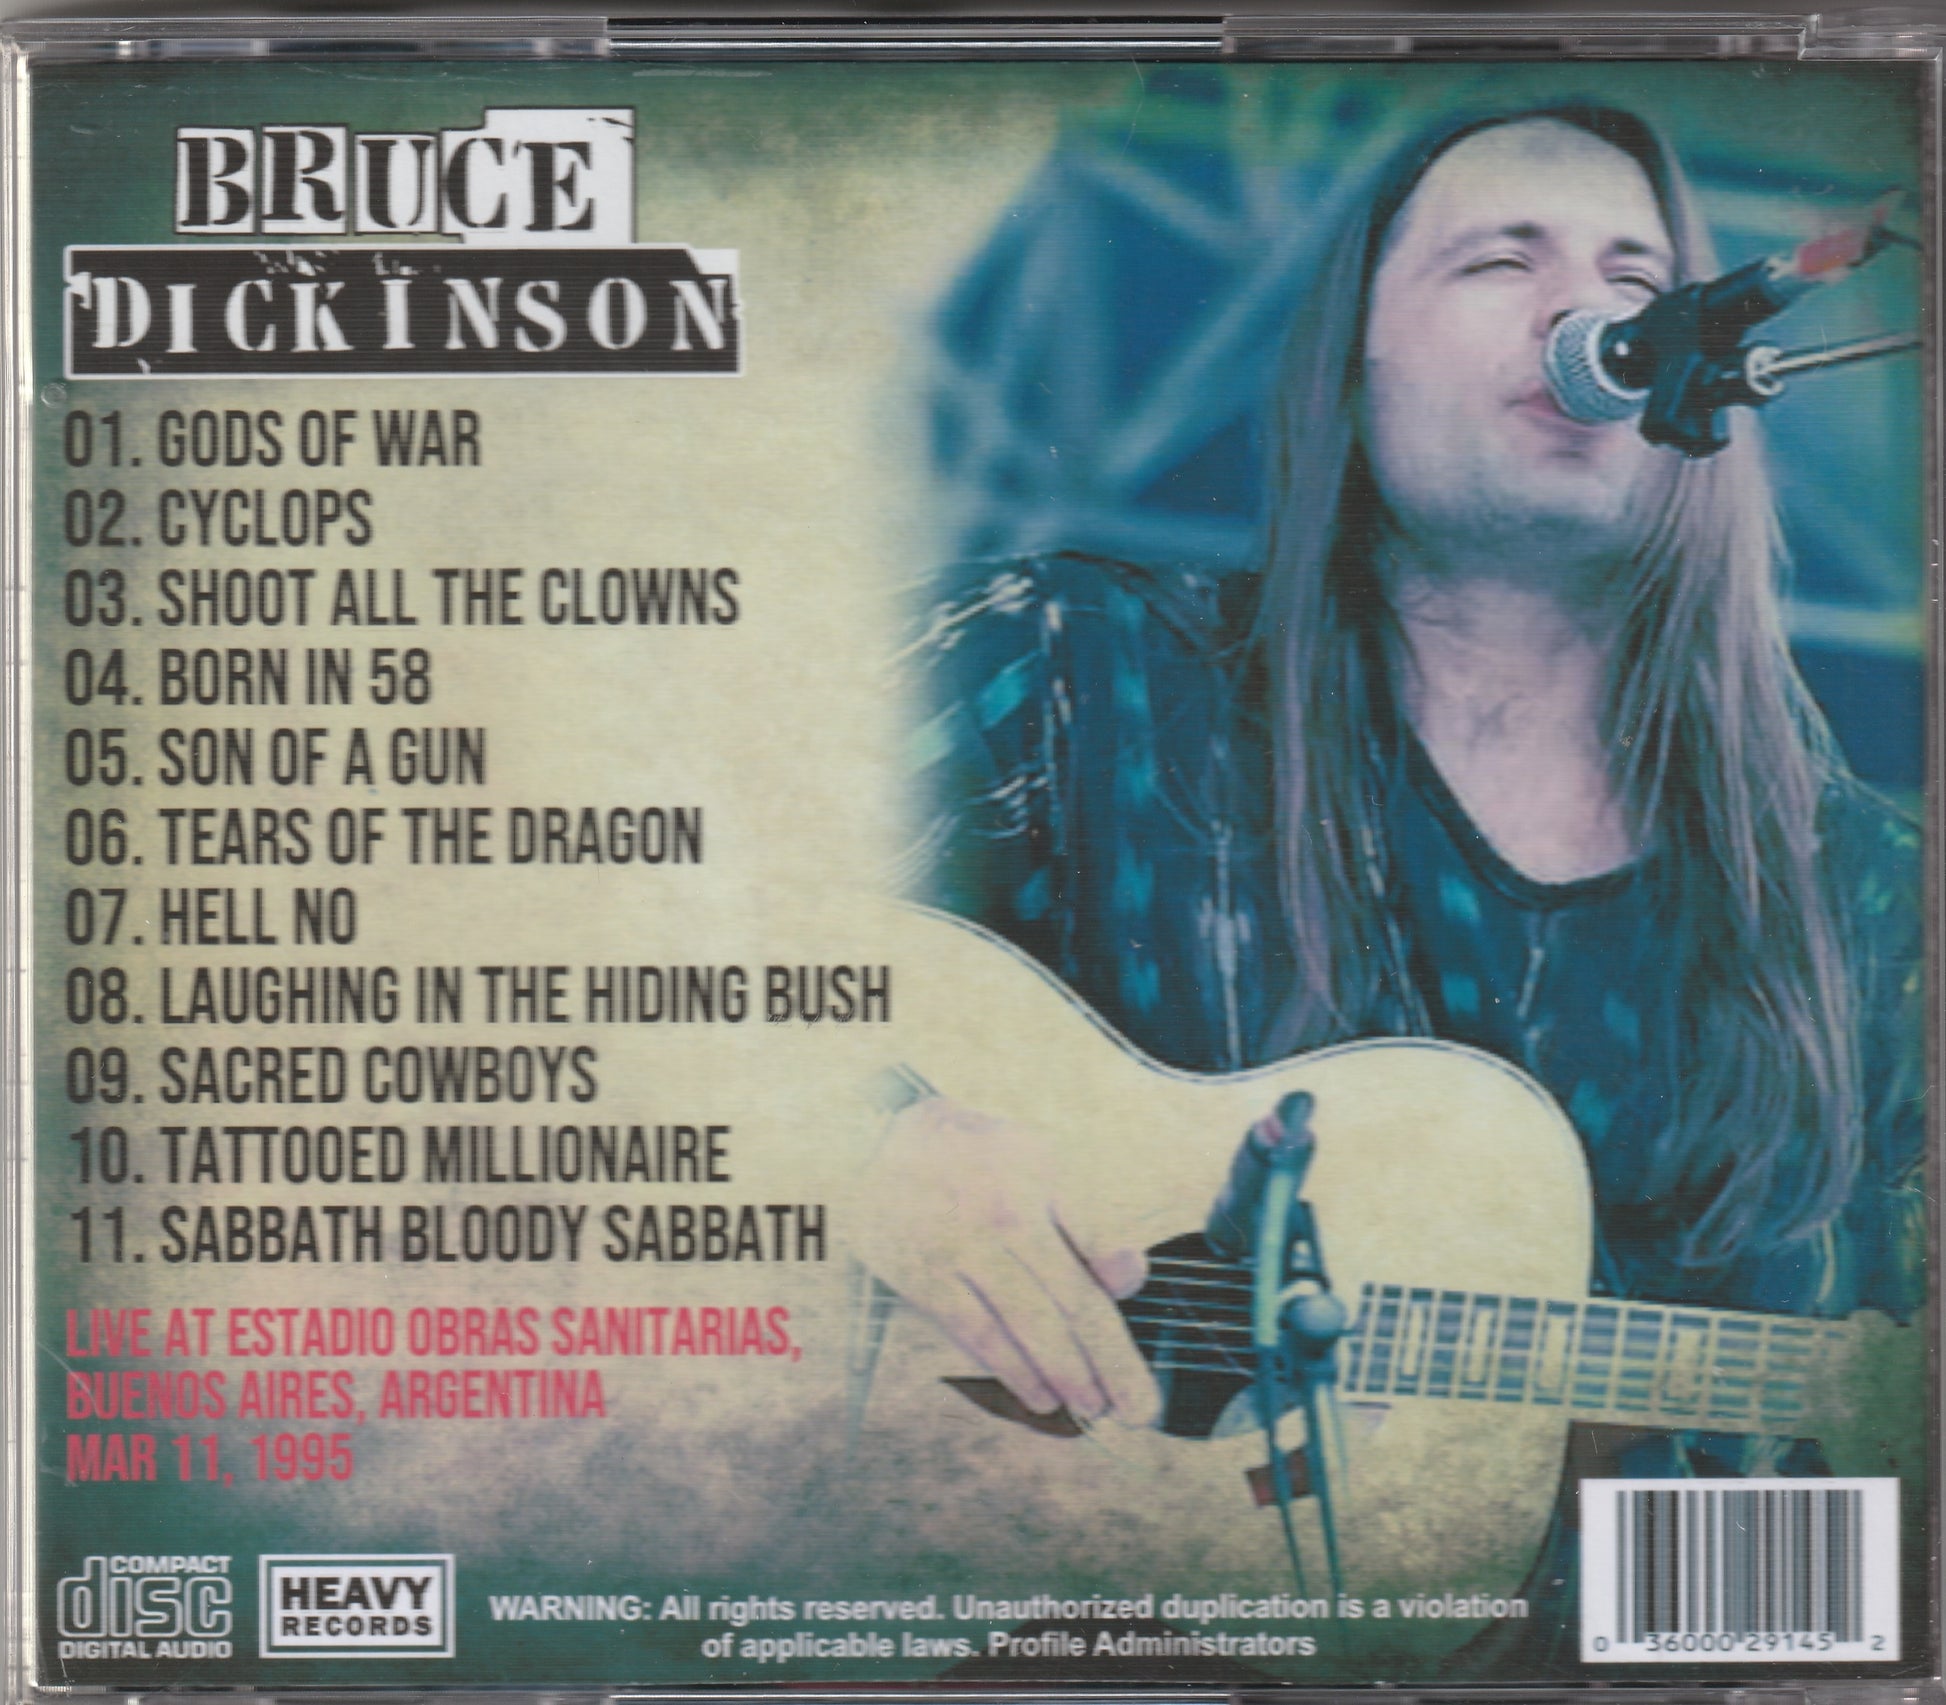 Bruce Dickinson - Tears of the Dragon (Official Audio) 